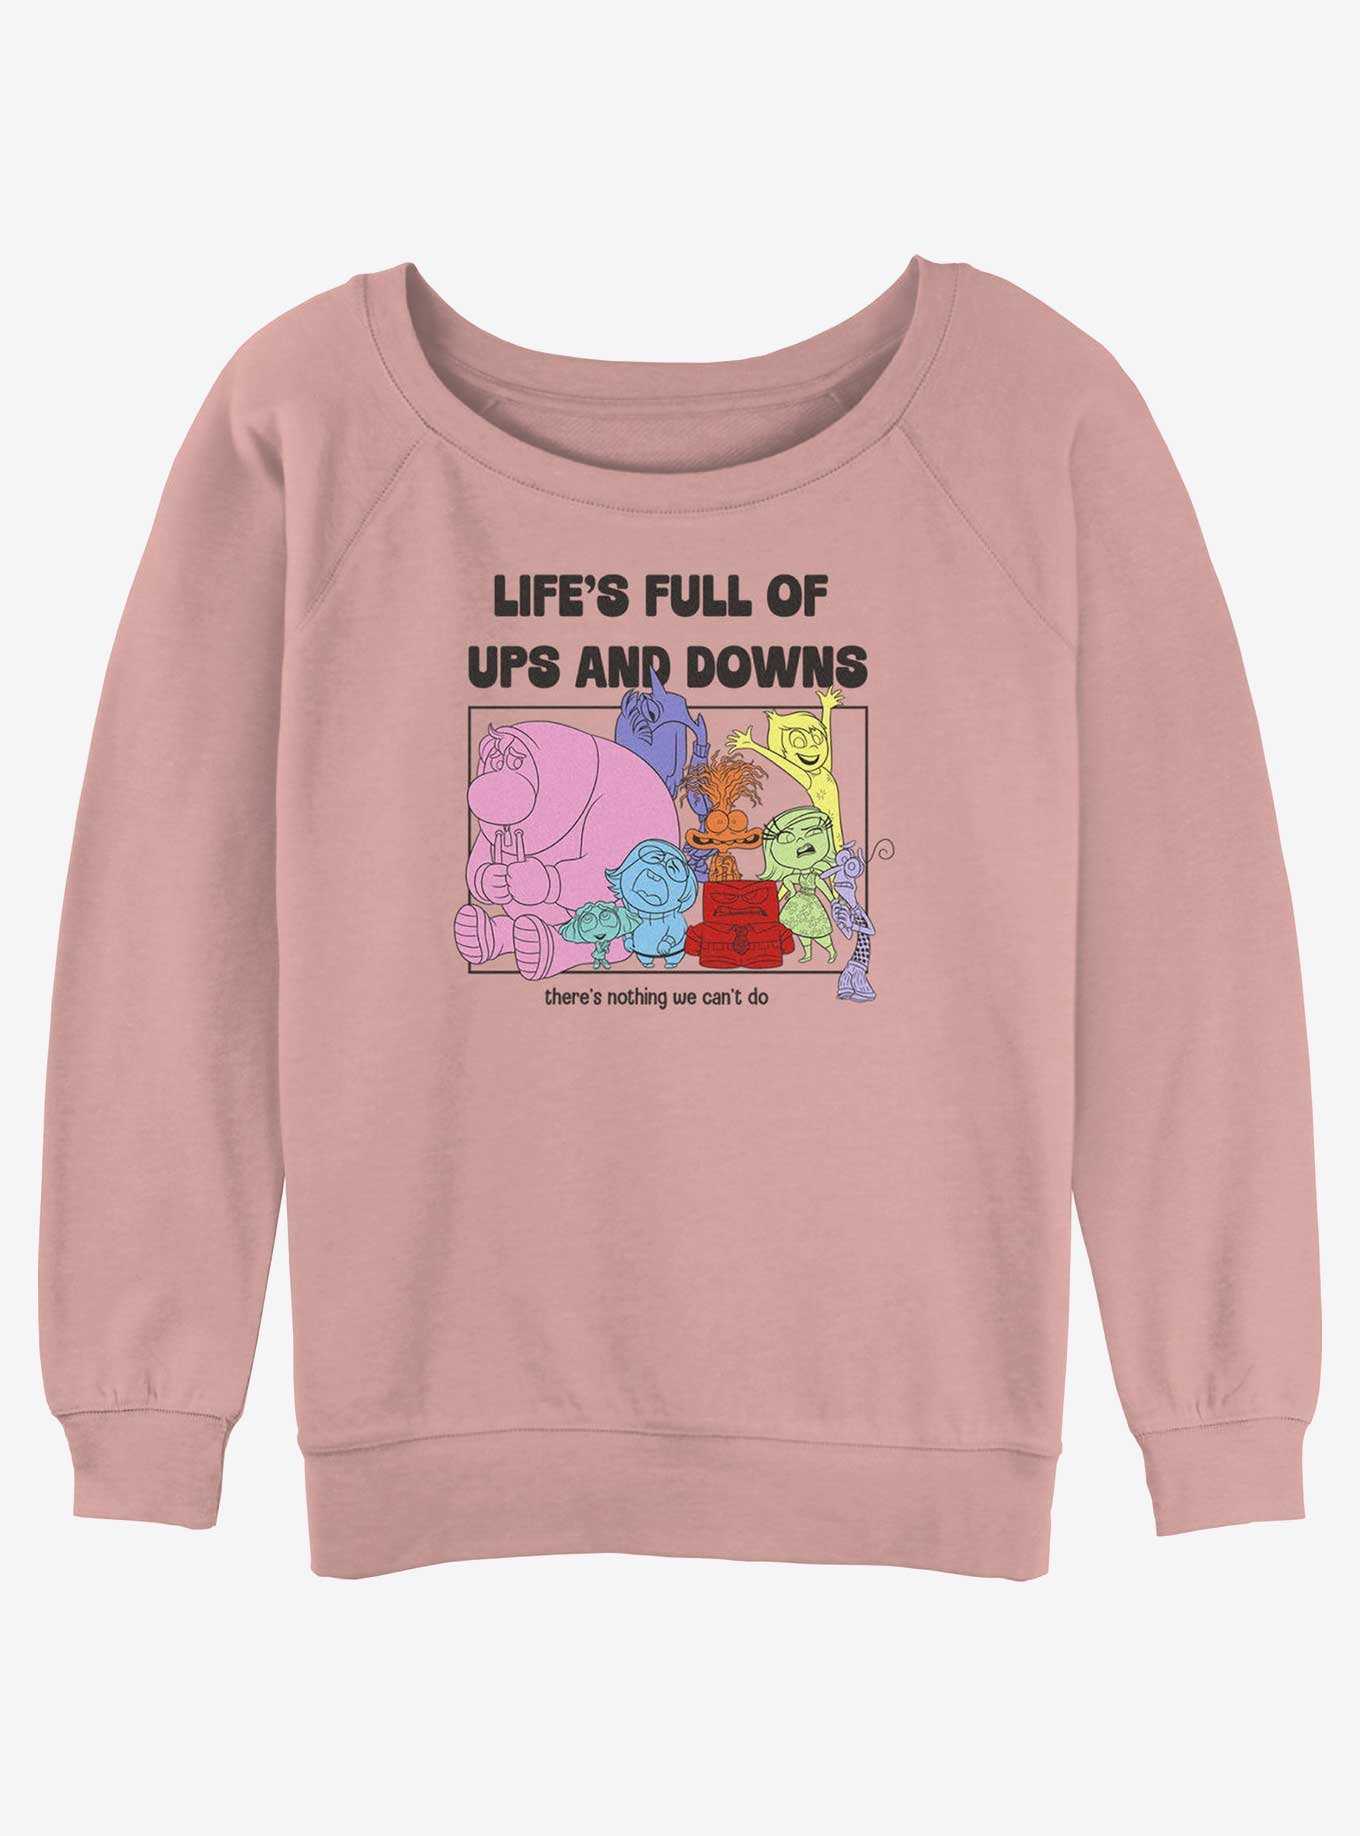 Disney Pixar Inside Out 2 Life's Full Of Ups And Downs Girls Slouchy Sweatshirt, , hi-res